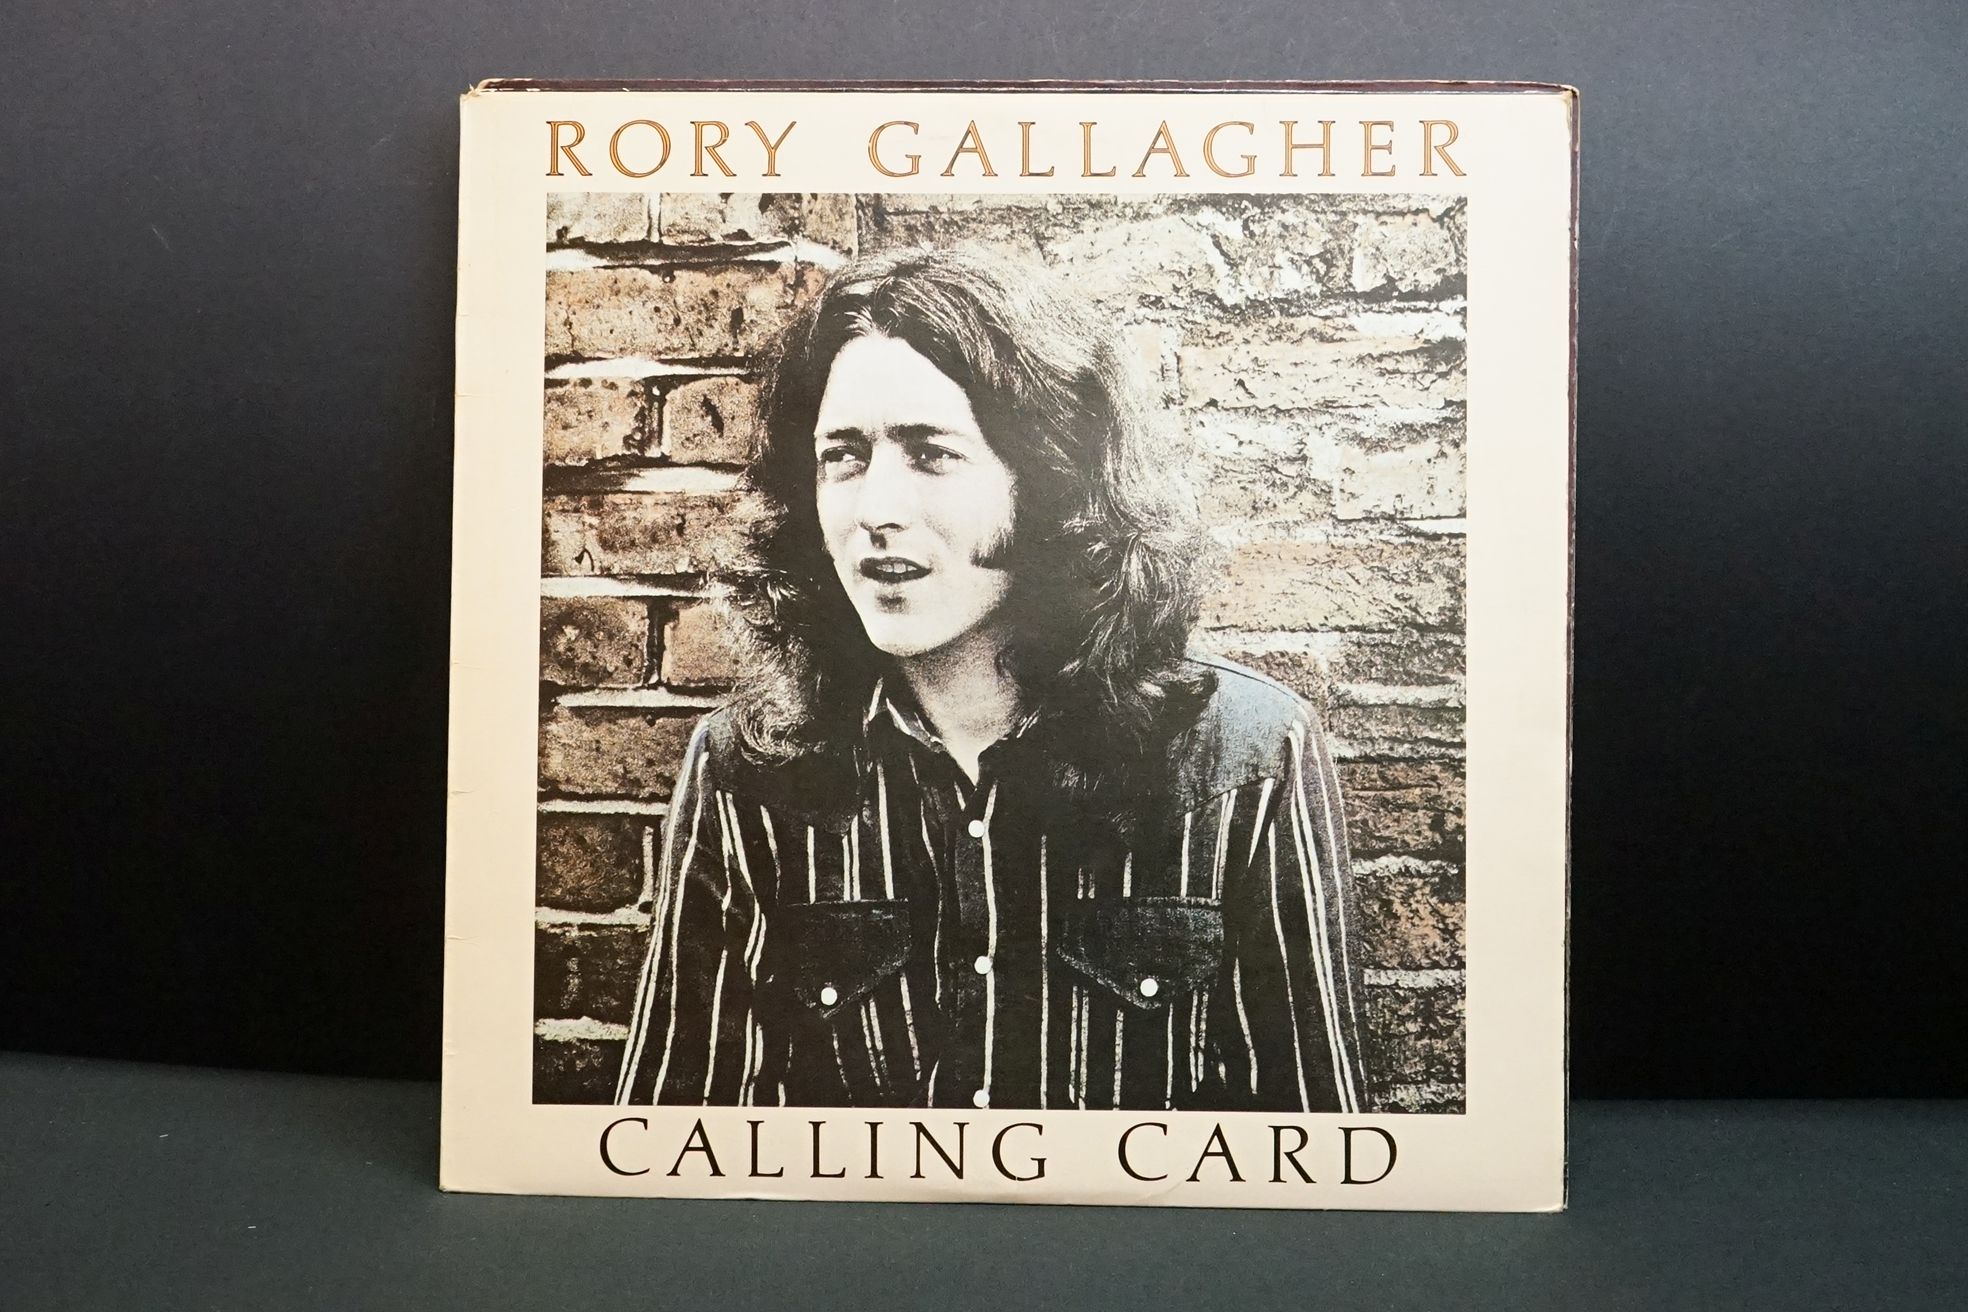 Vinyl - 12 Taste / Rory Gallagher LPs to include On The Boards, Self Titled (583042), Blueprint, - Image 14 of 16